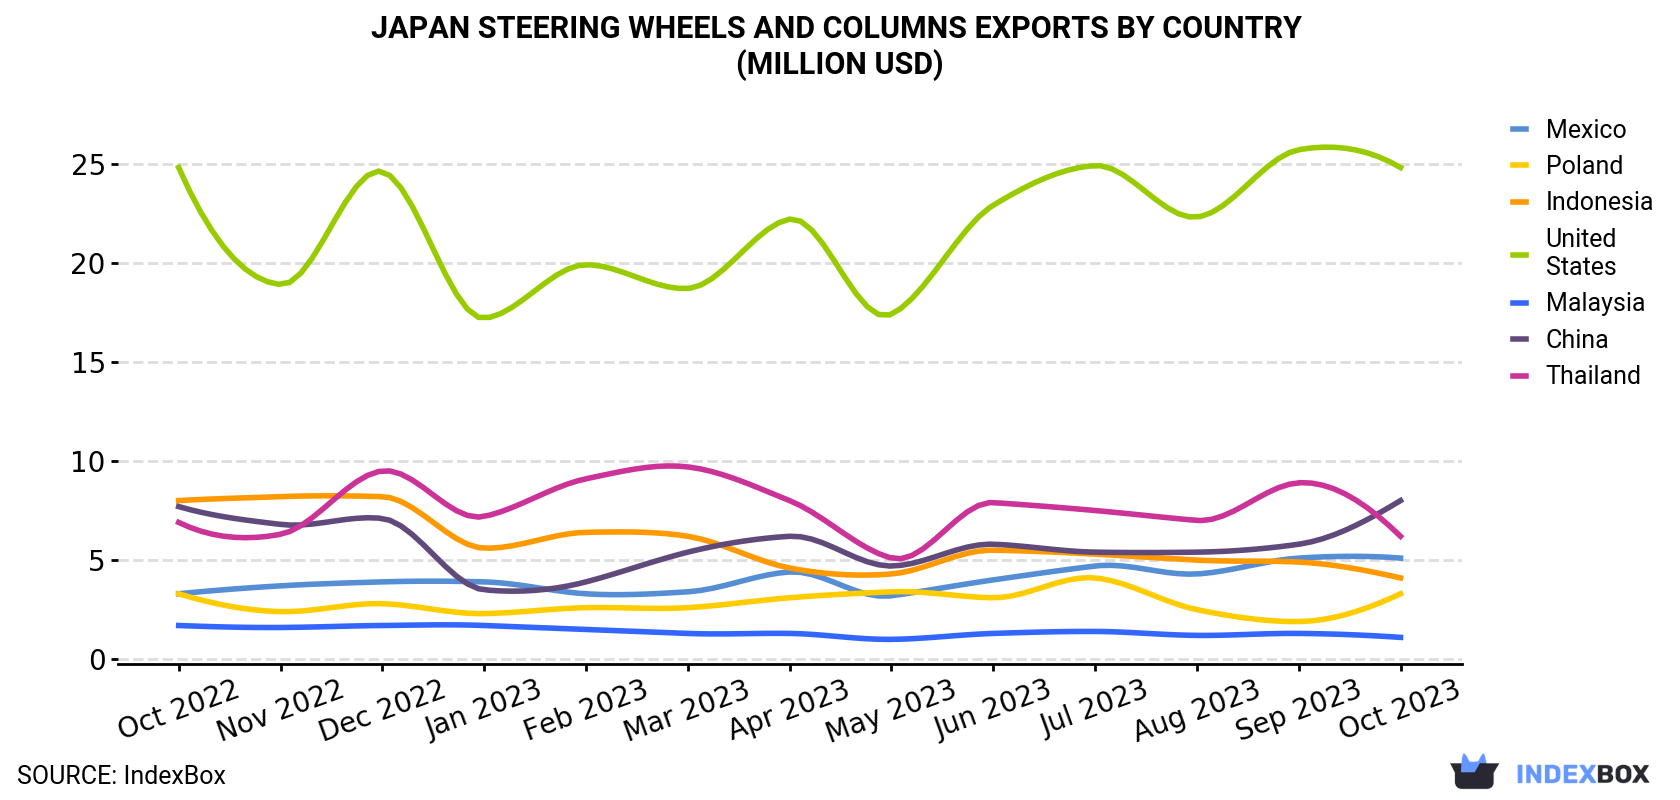 Japan Steering Wheels And Columns Exports By Country (Million USD)